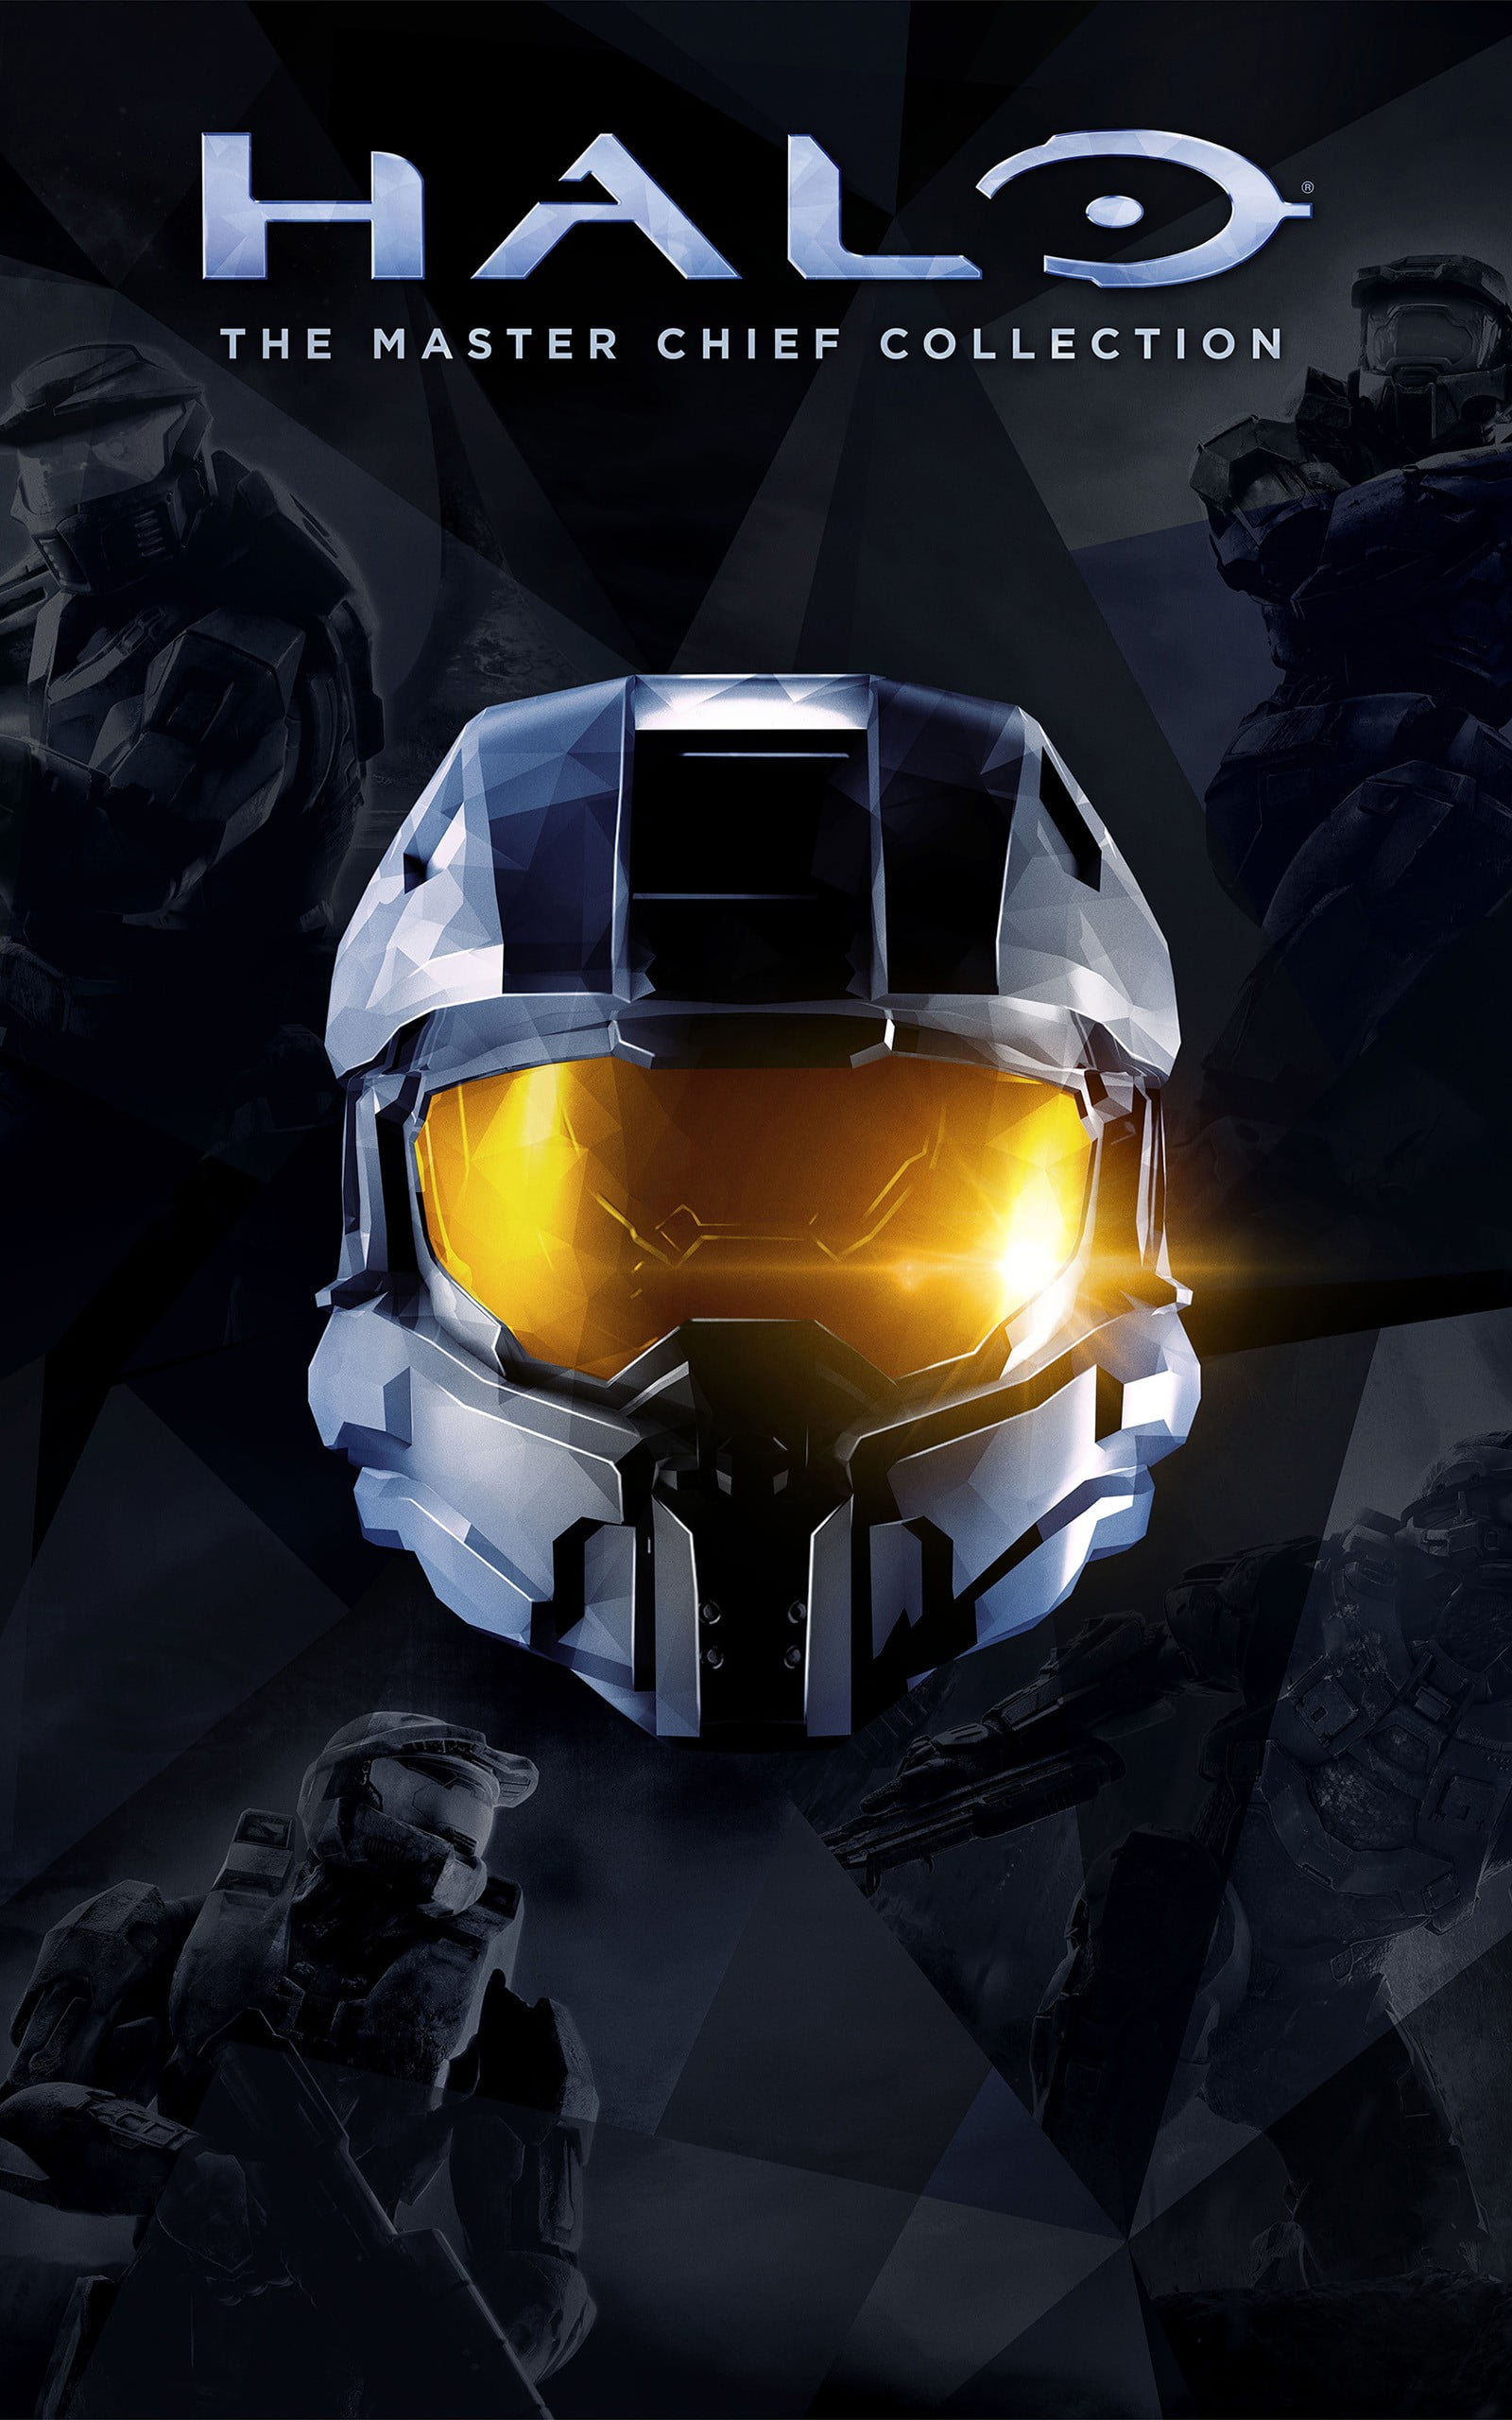 1080x1800 resolution | Halo the Master Chief collection digital ...